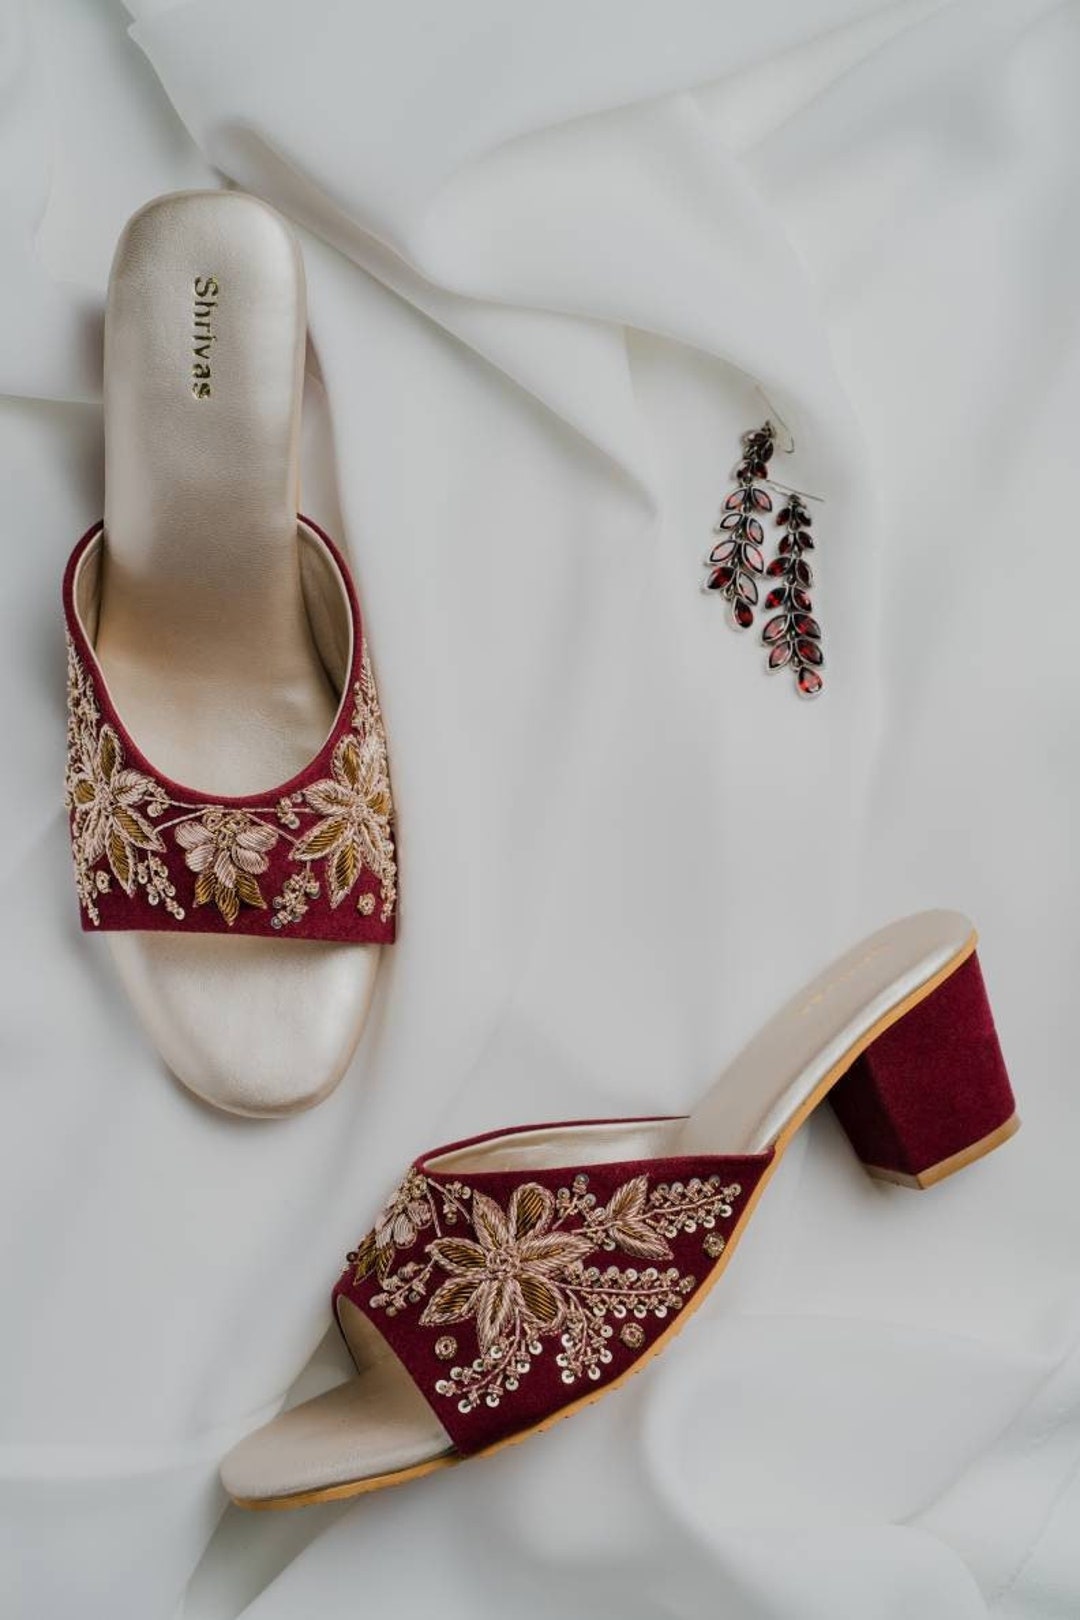 Tips and tricks on pairing sherwani and shoes